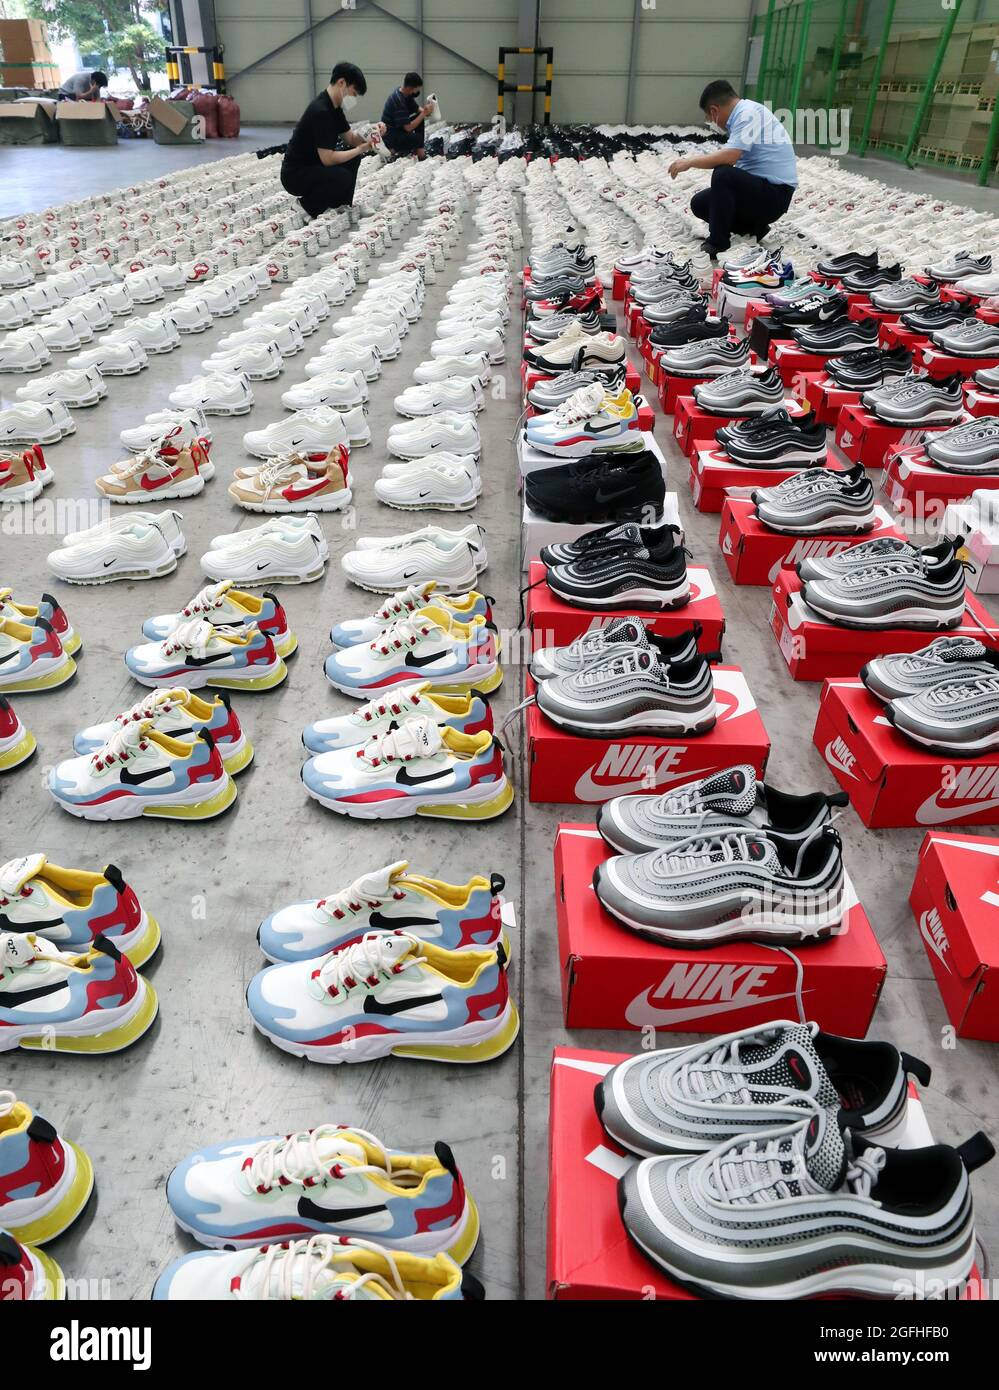 Korea. 26th Aug, 2021. 26th Aug, 2021. Fake designer sneakers seized in Busan Customs officials display thousands of sneakers of and other brands have confiscated at a warehouse